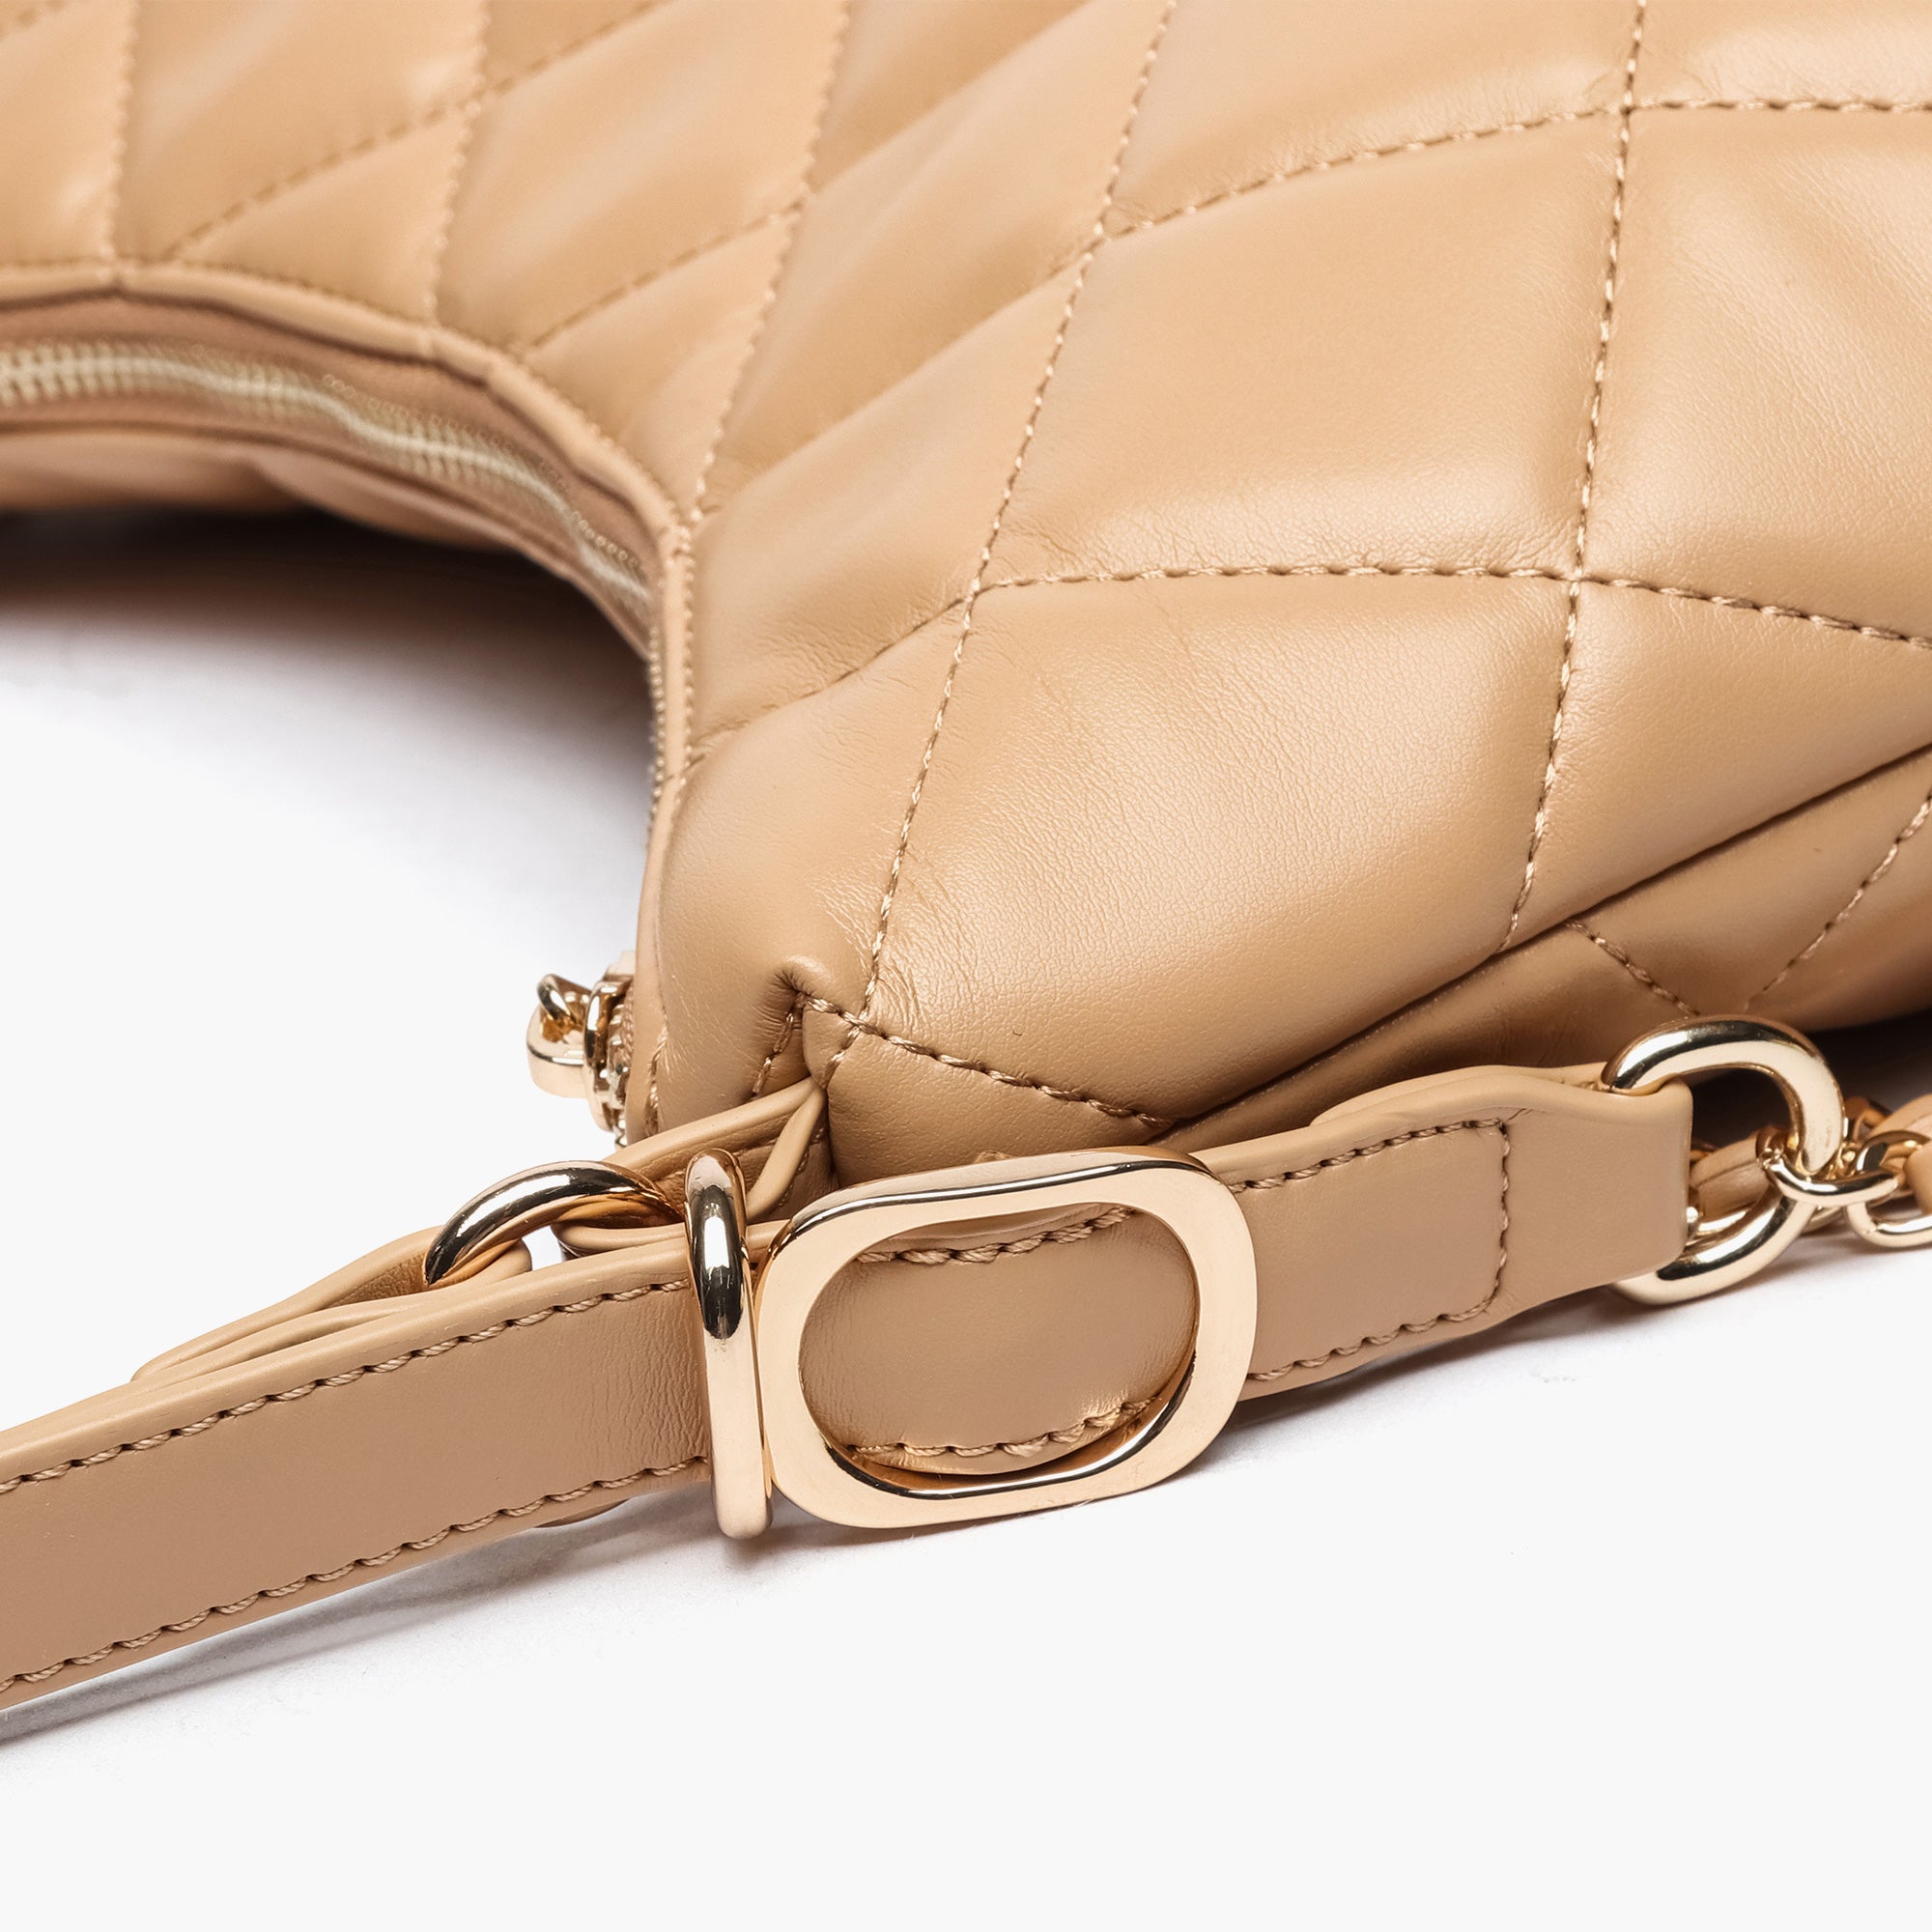 Dream Quilted Convertible Shoulder Bag